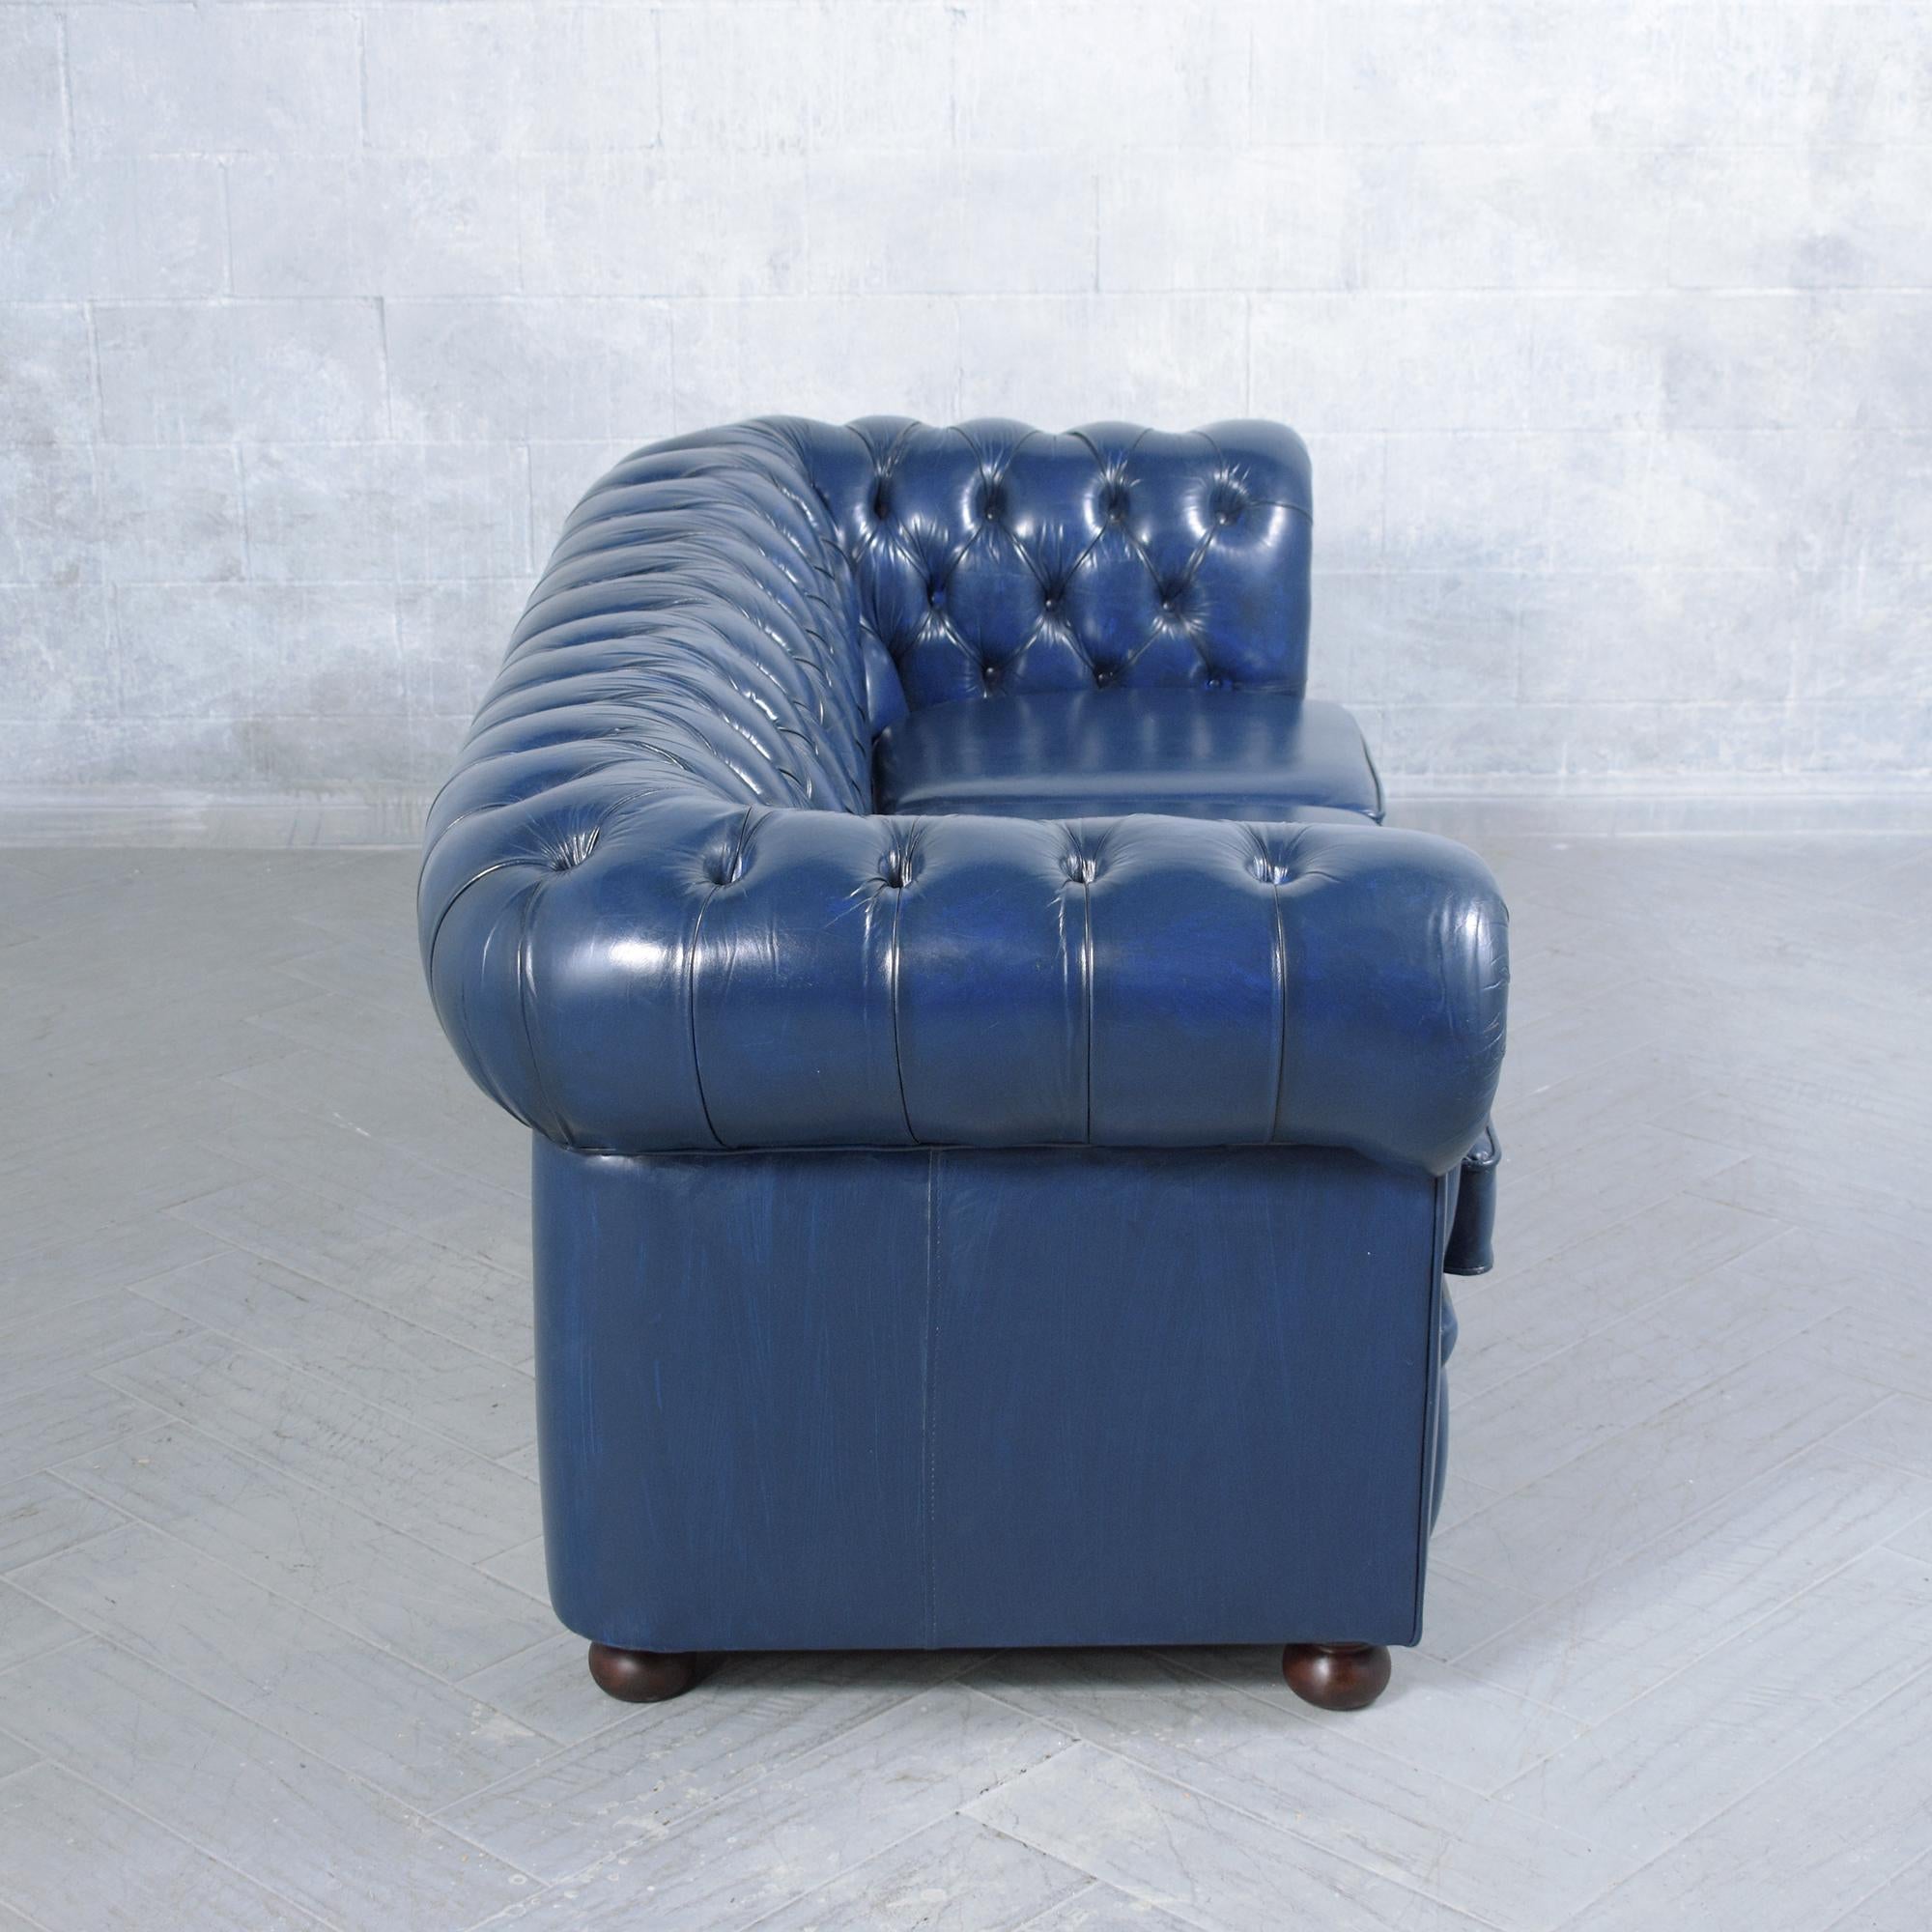 Restored Vintage Chesterfield Sofa in Distressed Navy Leather 2